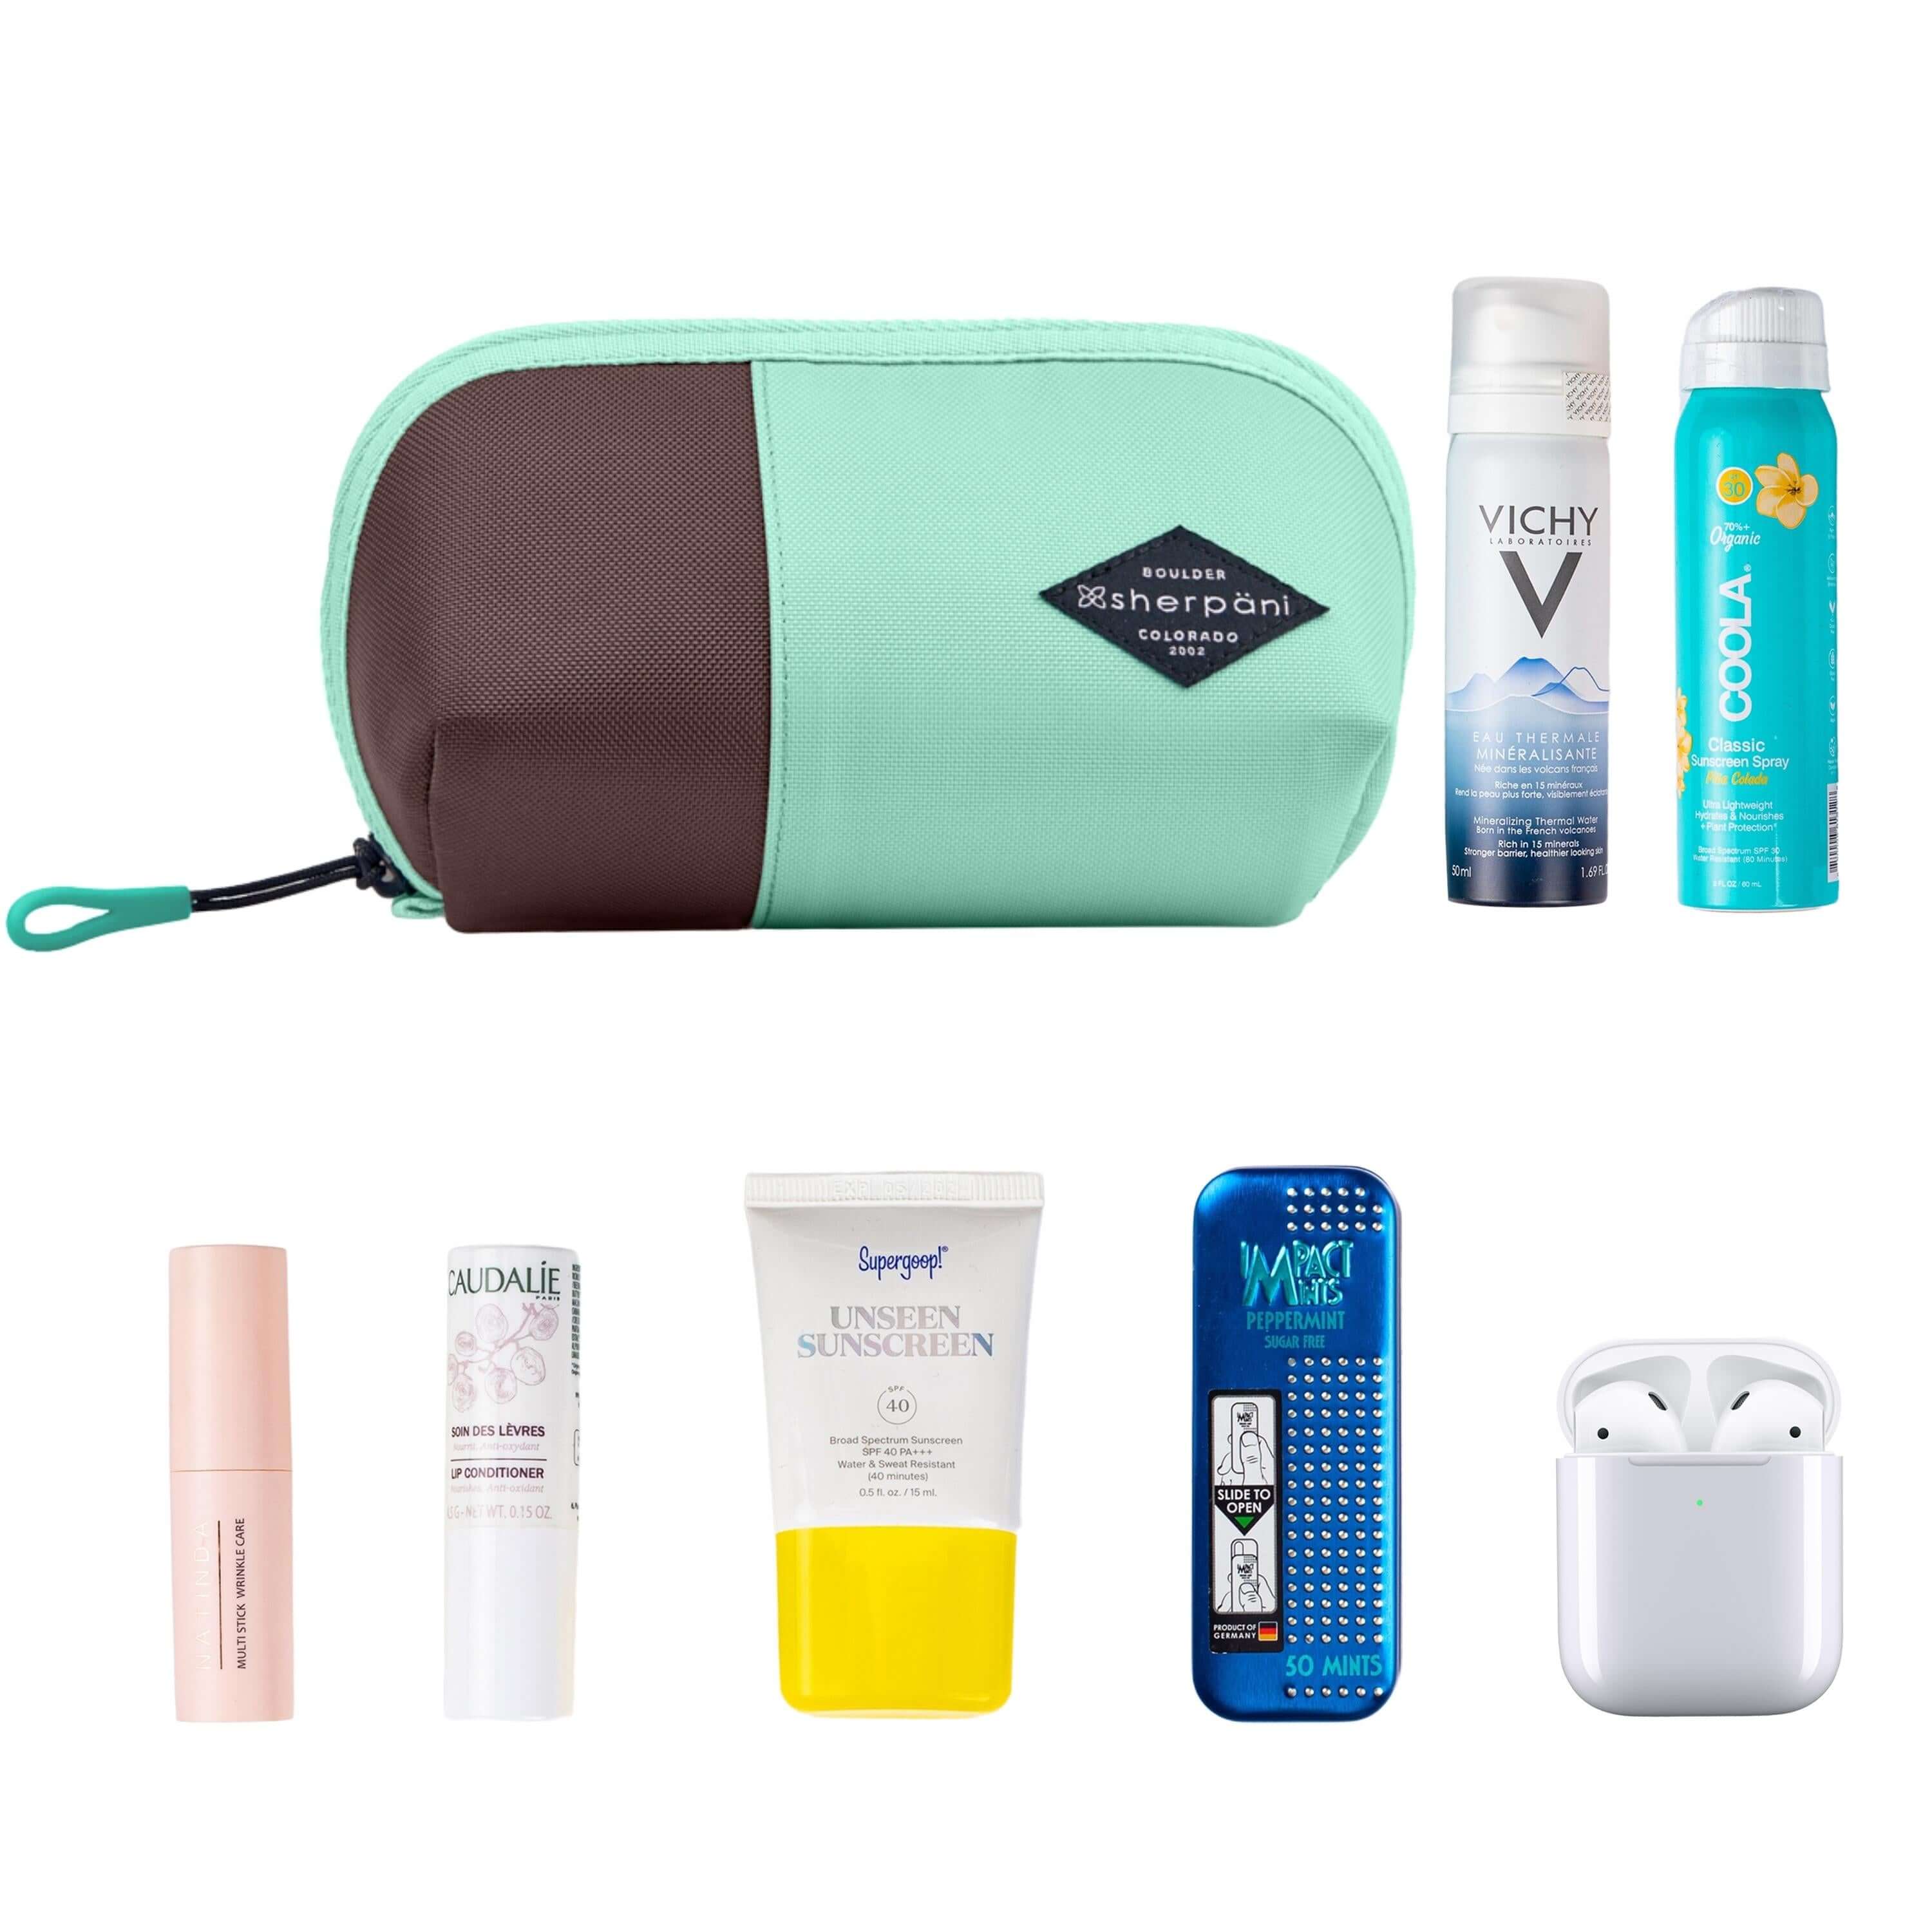 Top view of example items to fill the bag. Sherpani travel accessory, the Harmony in Seagreen, is shown in the upper left corner. It is surrounded by an assortment of items: beauty products, skincare products, sunscreen, mints and AirPods. 